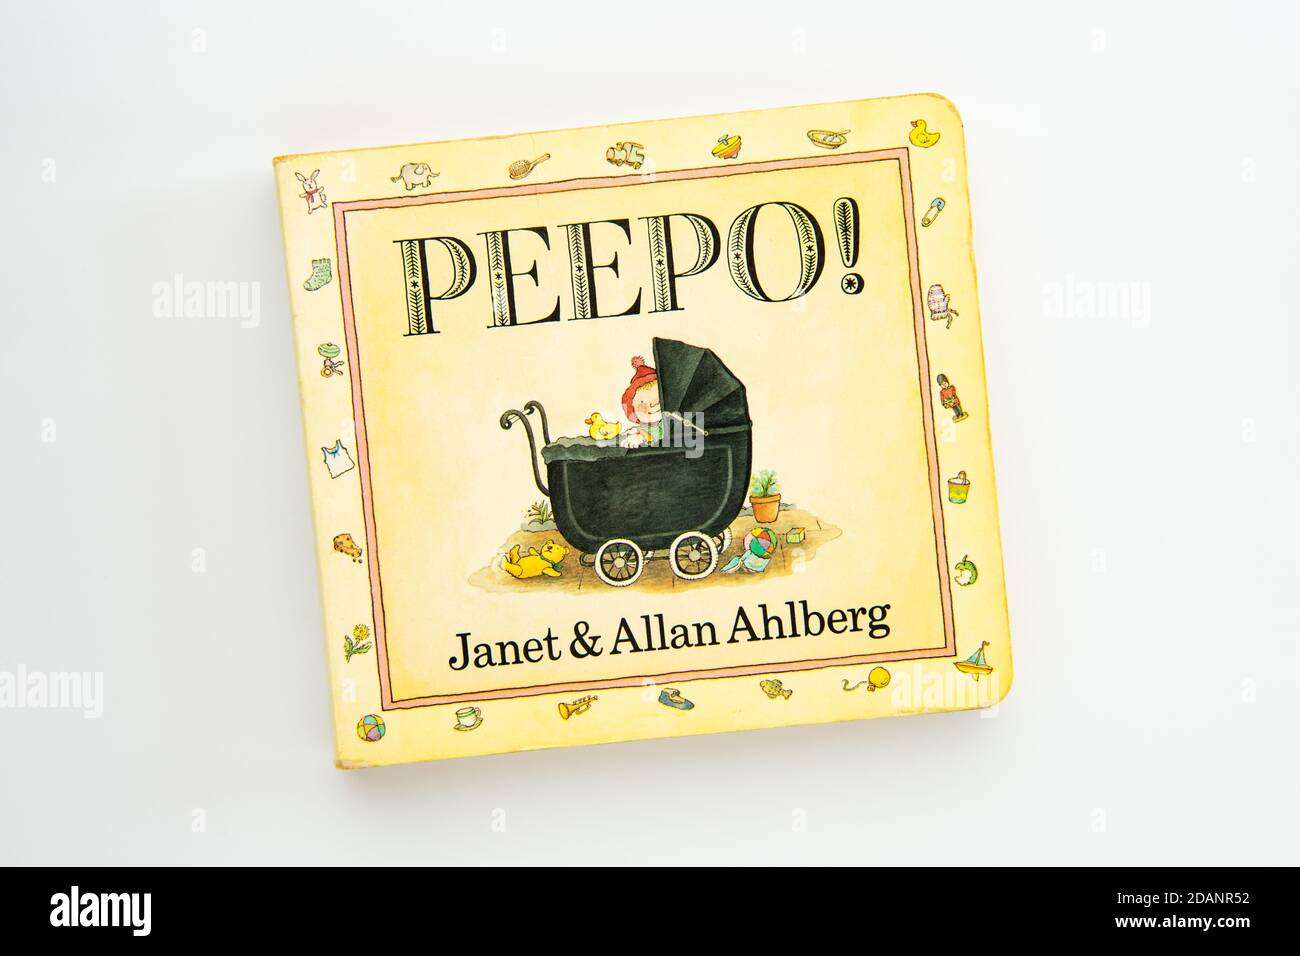 Peepo! by Janet and Allan Ahlberg - board book for babies and toddlers Stock Photo